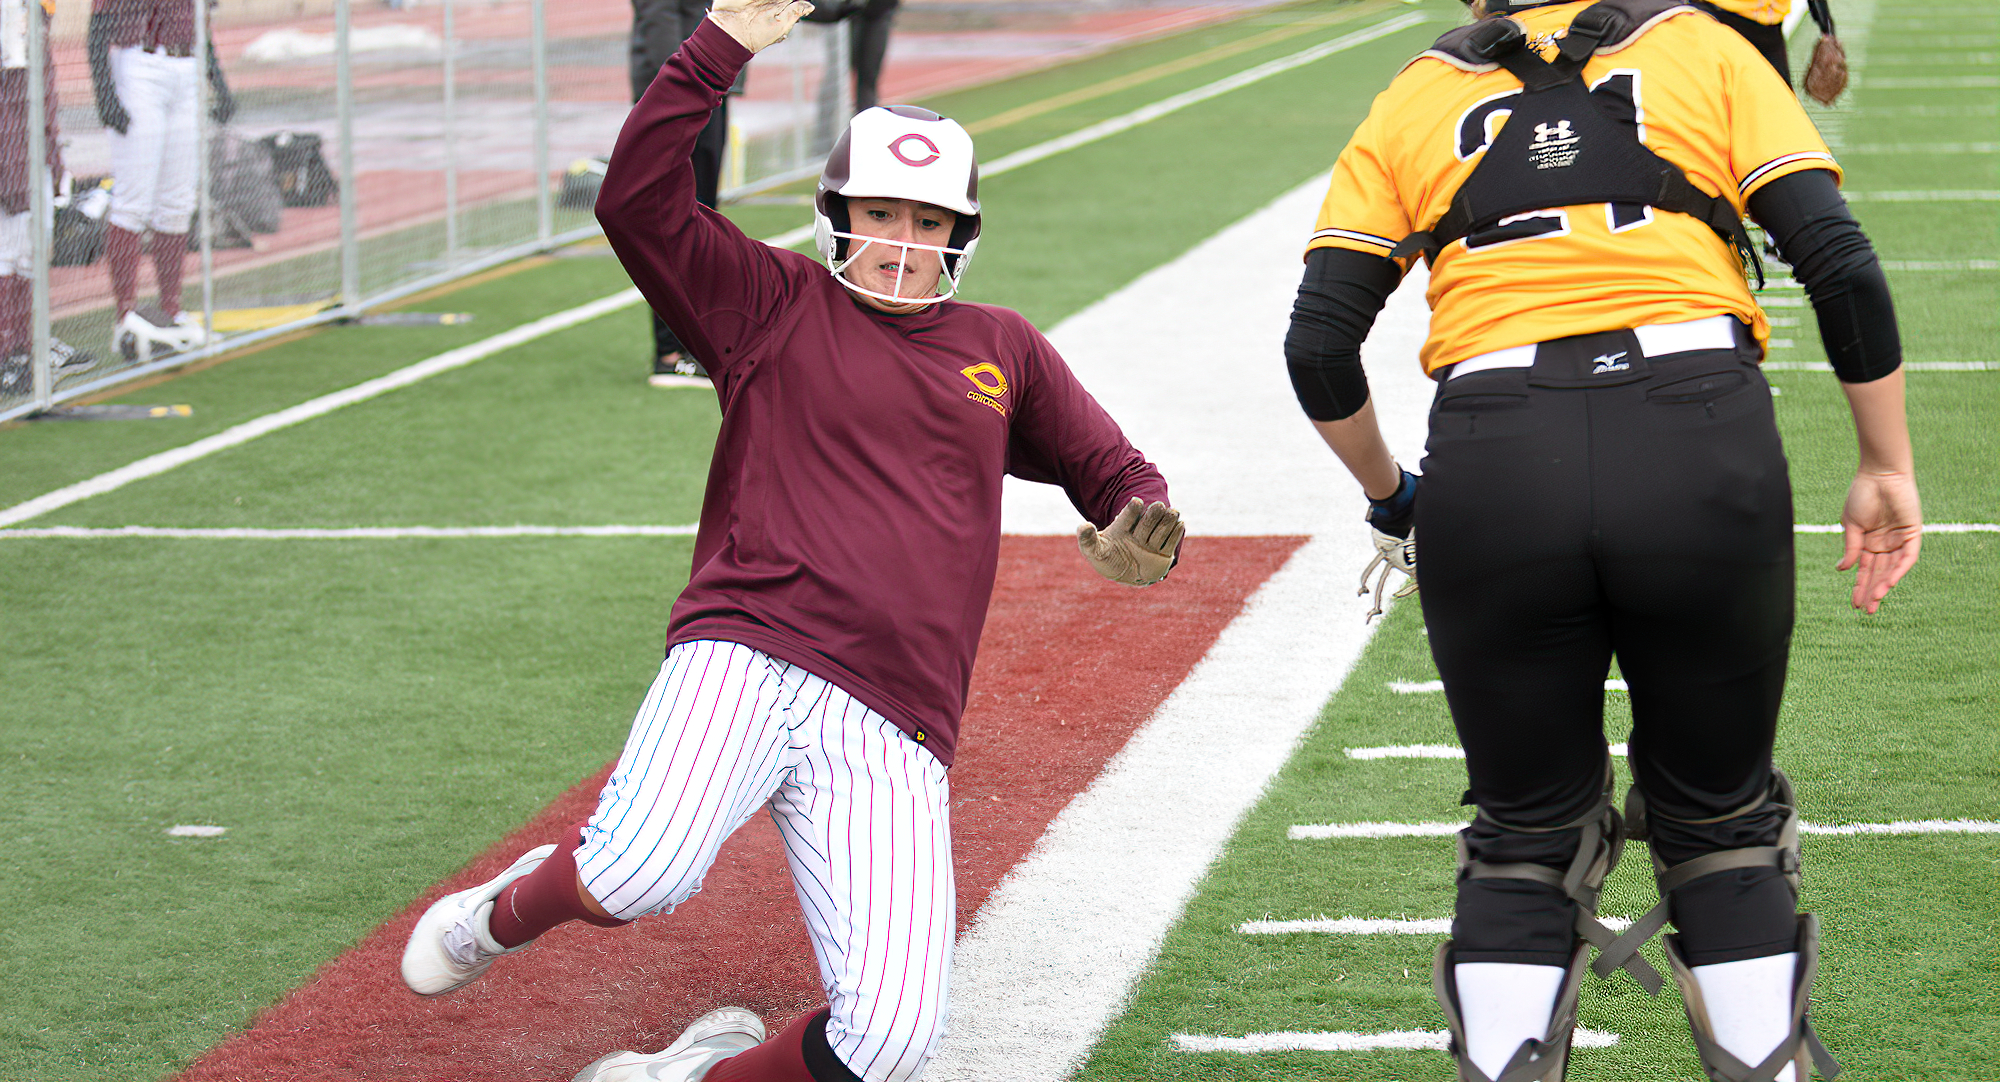 Kenzie Leither slides into home in Game 2 against UW-Superior. She went 3-for-5 on the day.